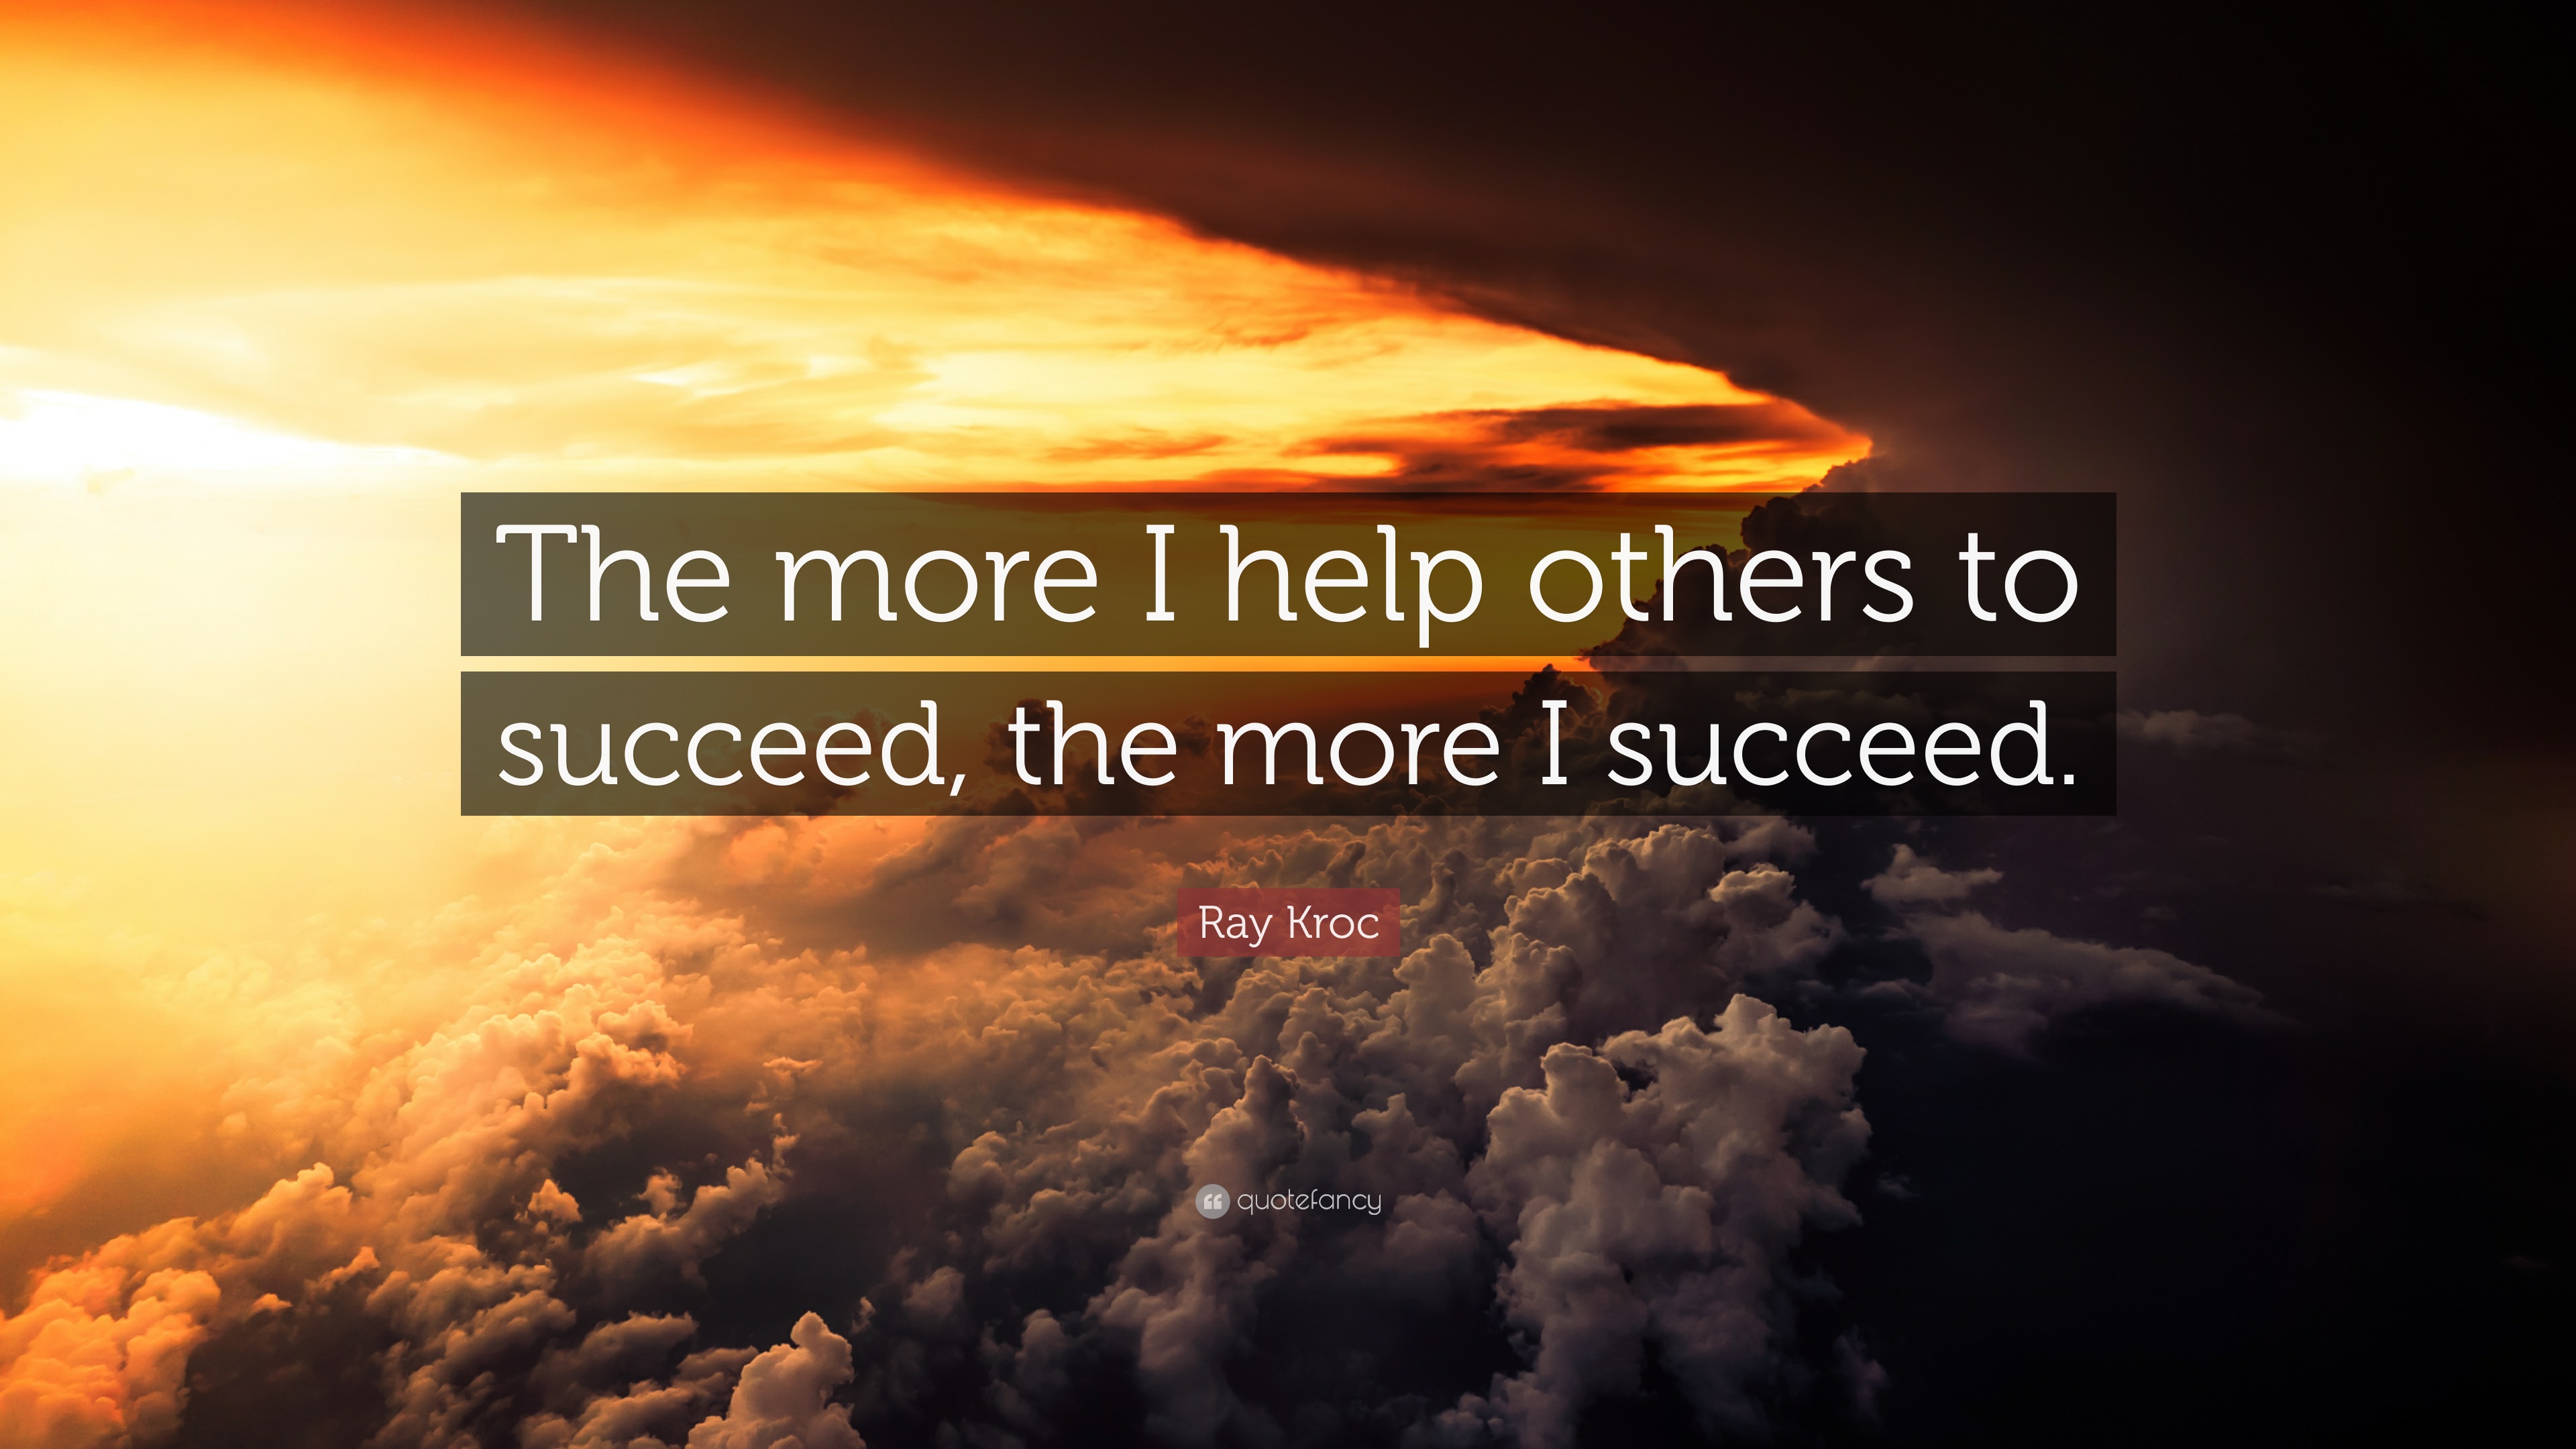 Ray Kroc Quote: "The more I help others to succeed, the more.